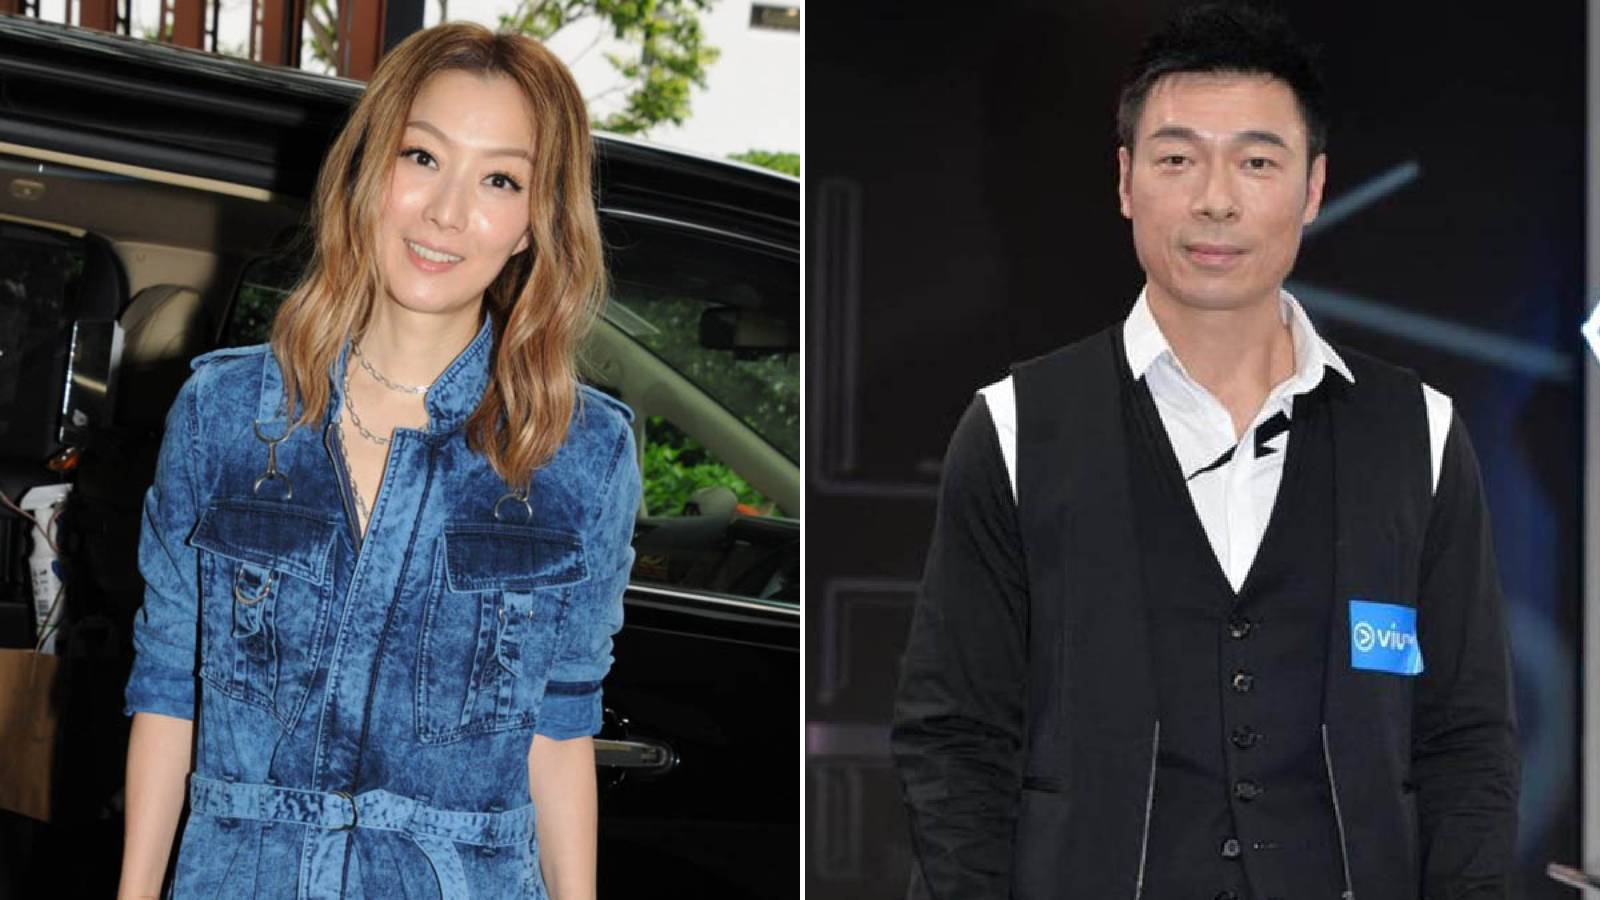 Sammi Cheng Likens Her Husband'S Cheating Scandal To A Fall, Says It'S 